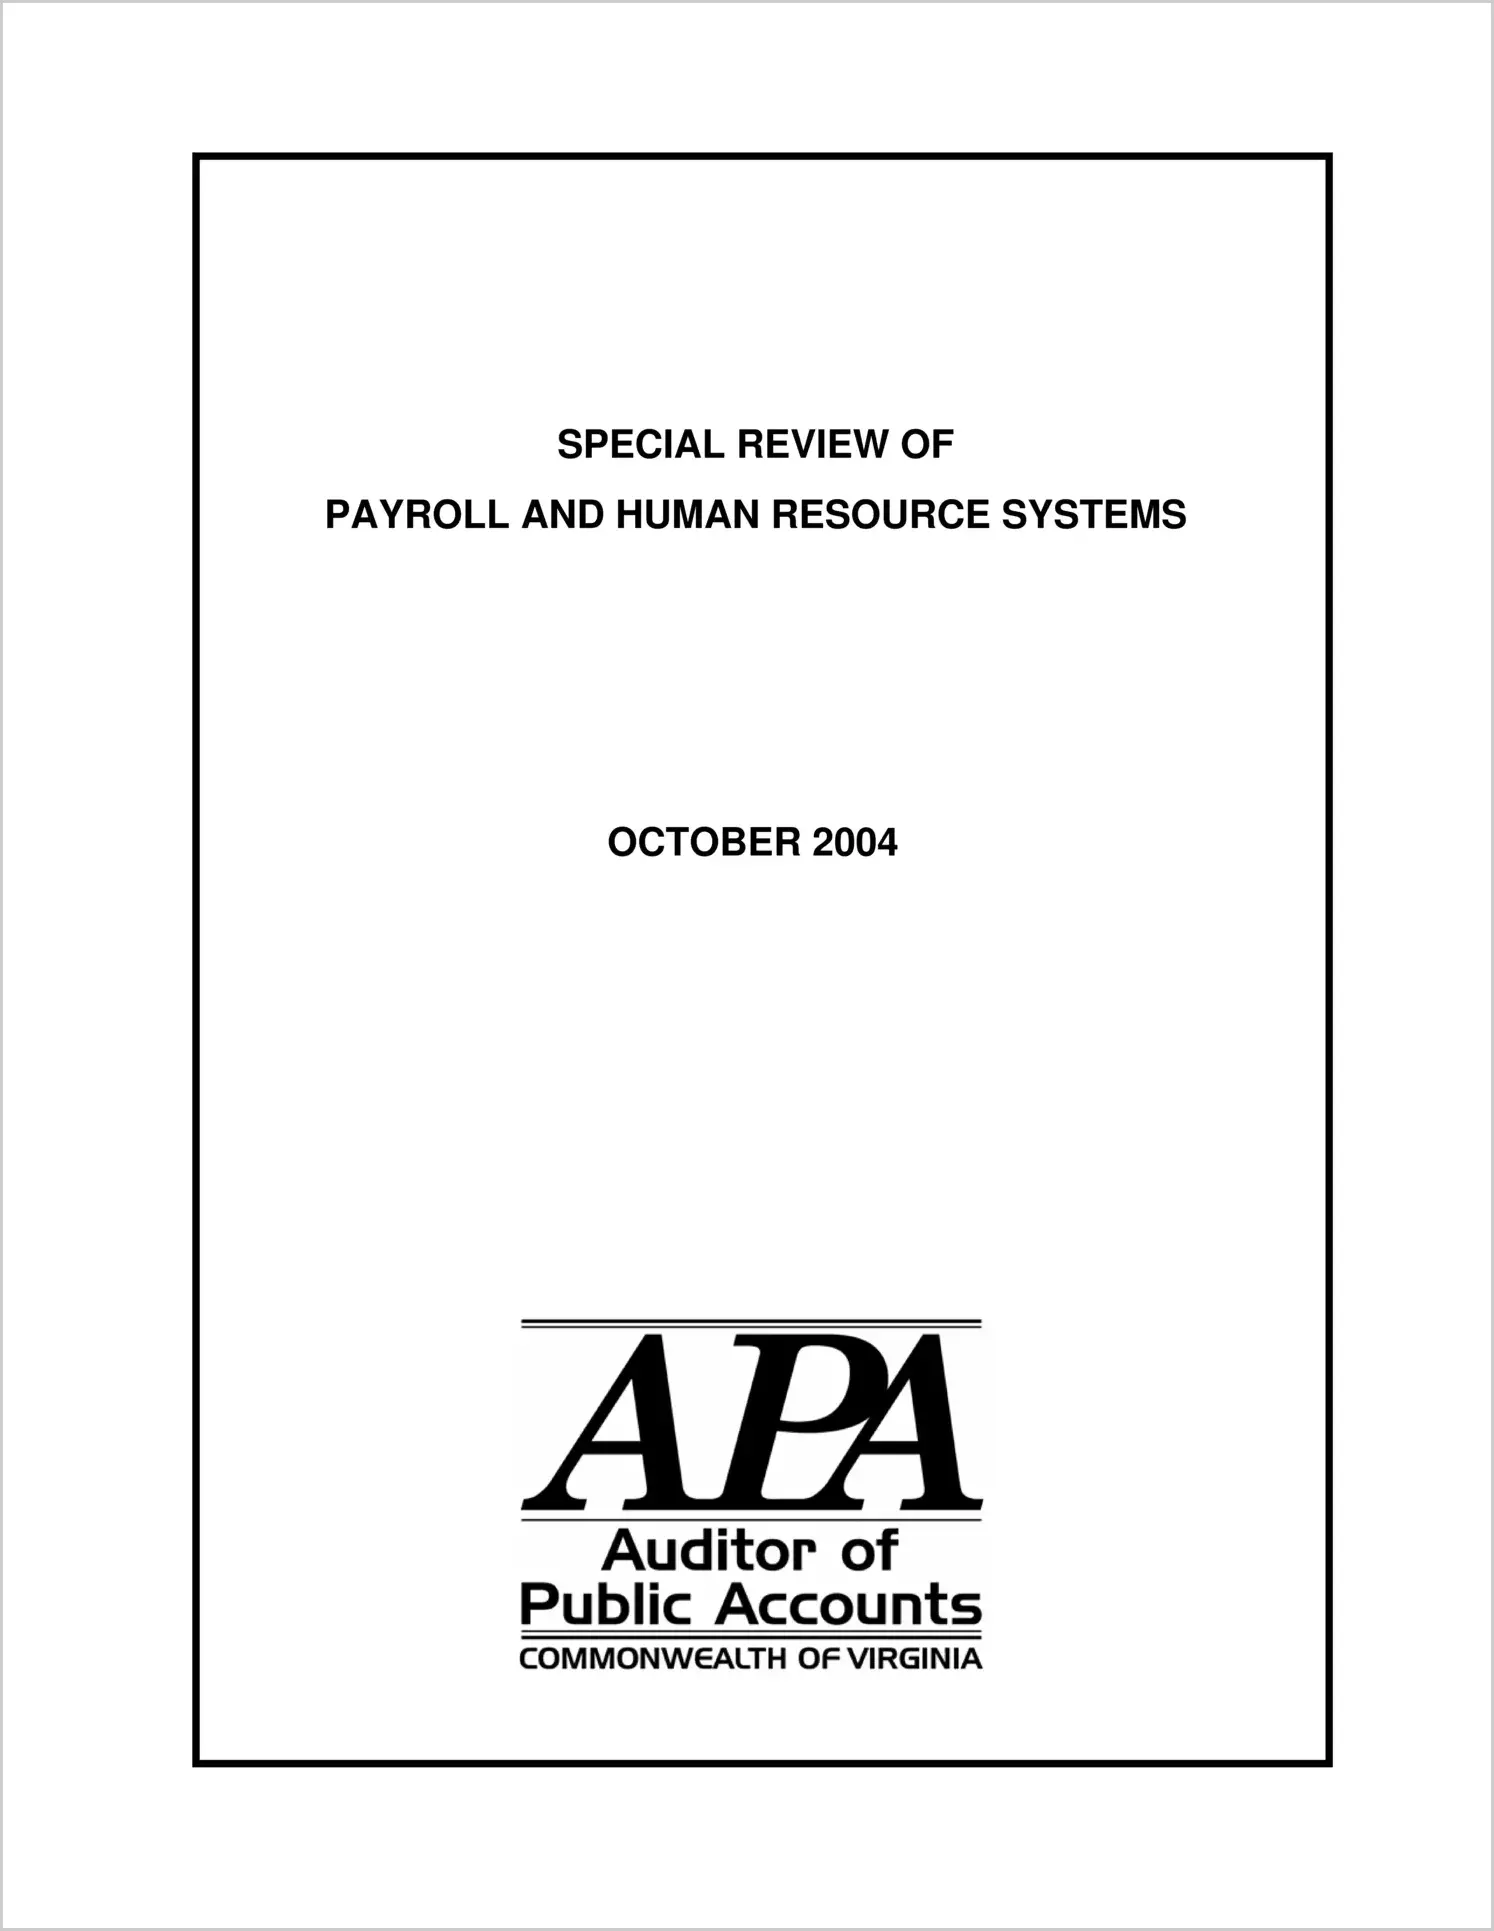 Special ReportSpecial Review of Payroll And Human Resource Systems (Report Date: October 2004)